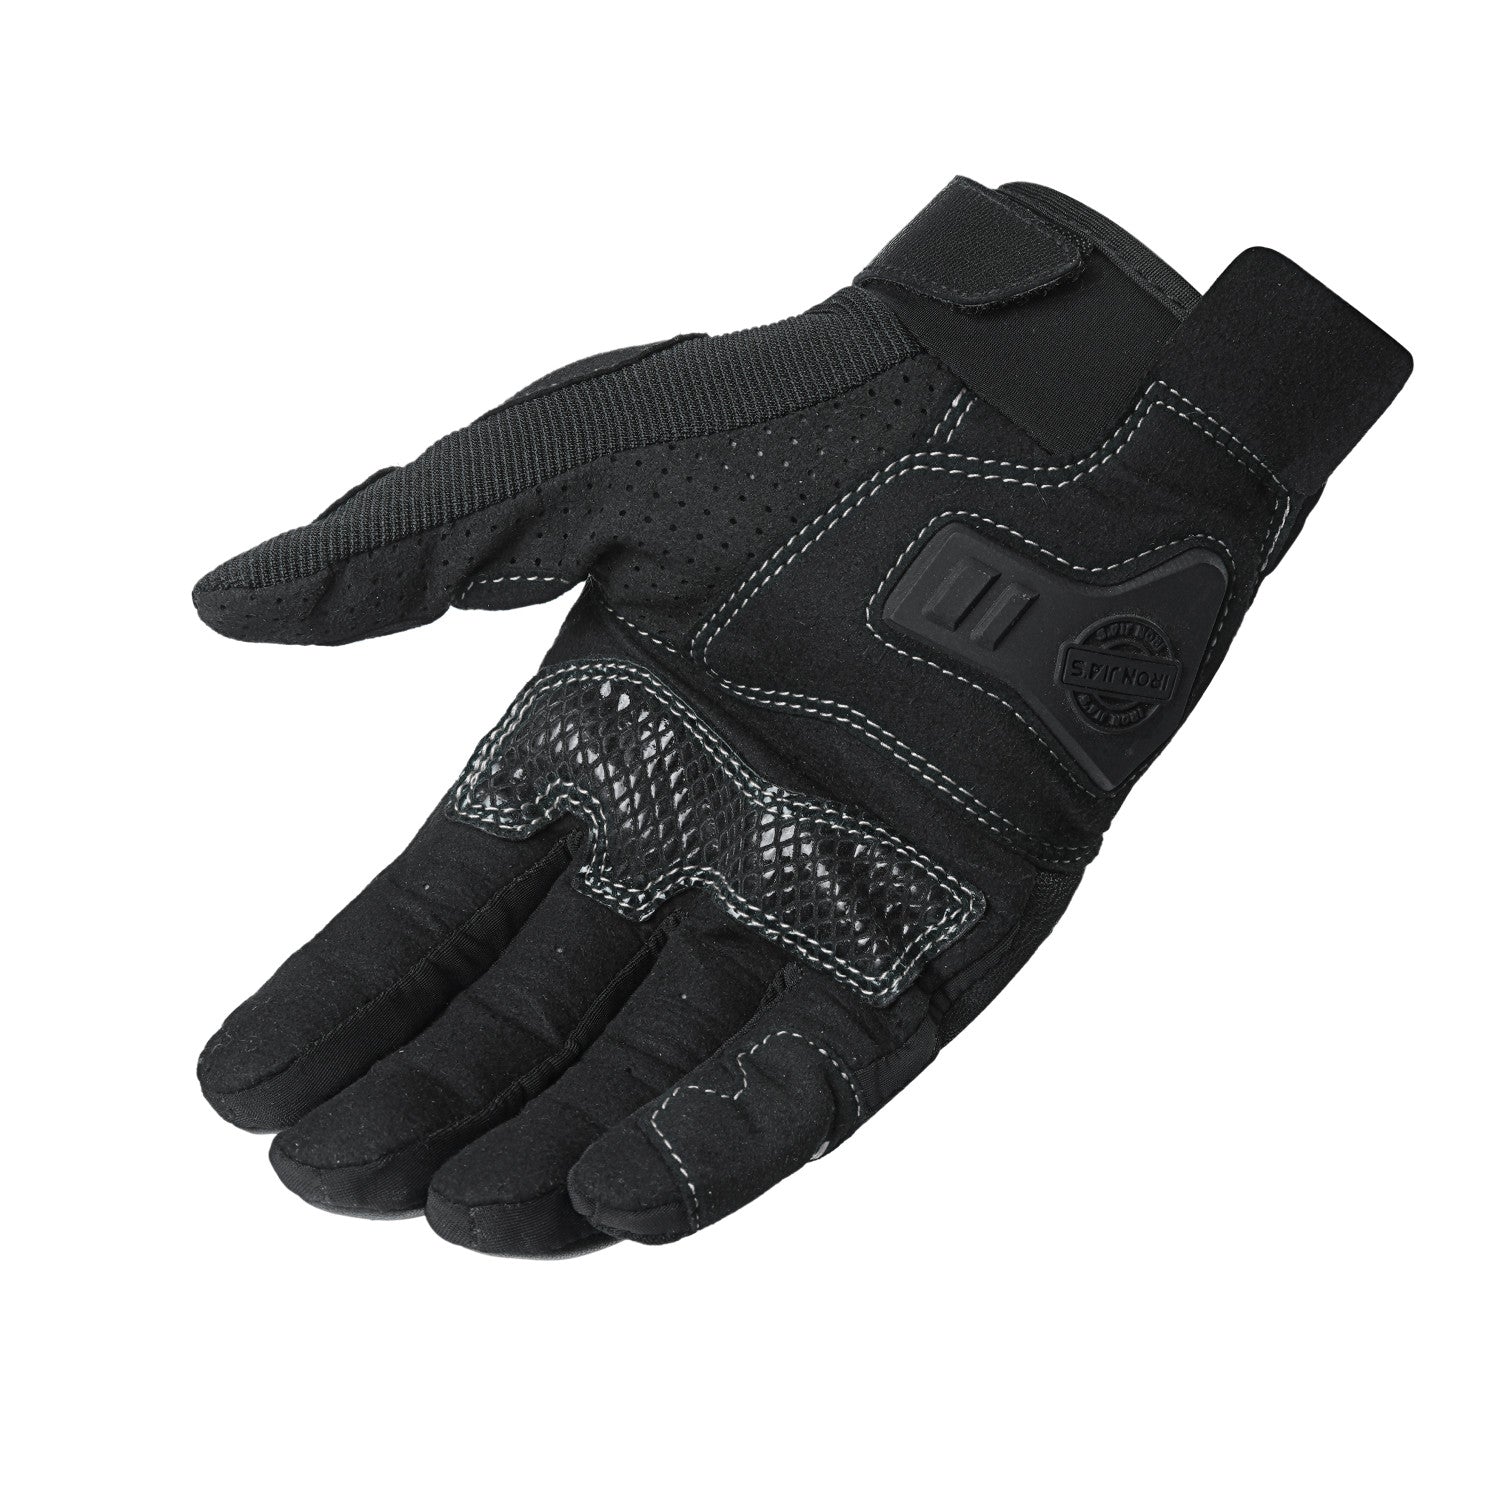 Summer Motorcycle Gloves | JIA07